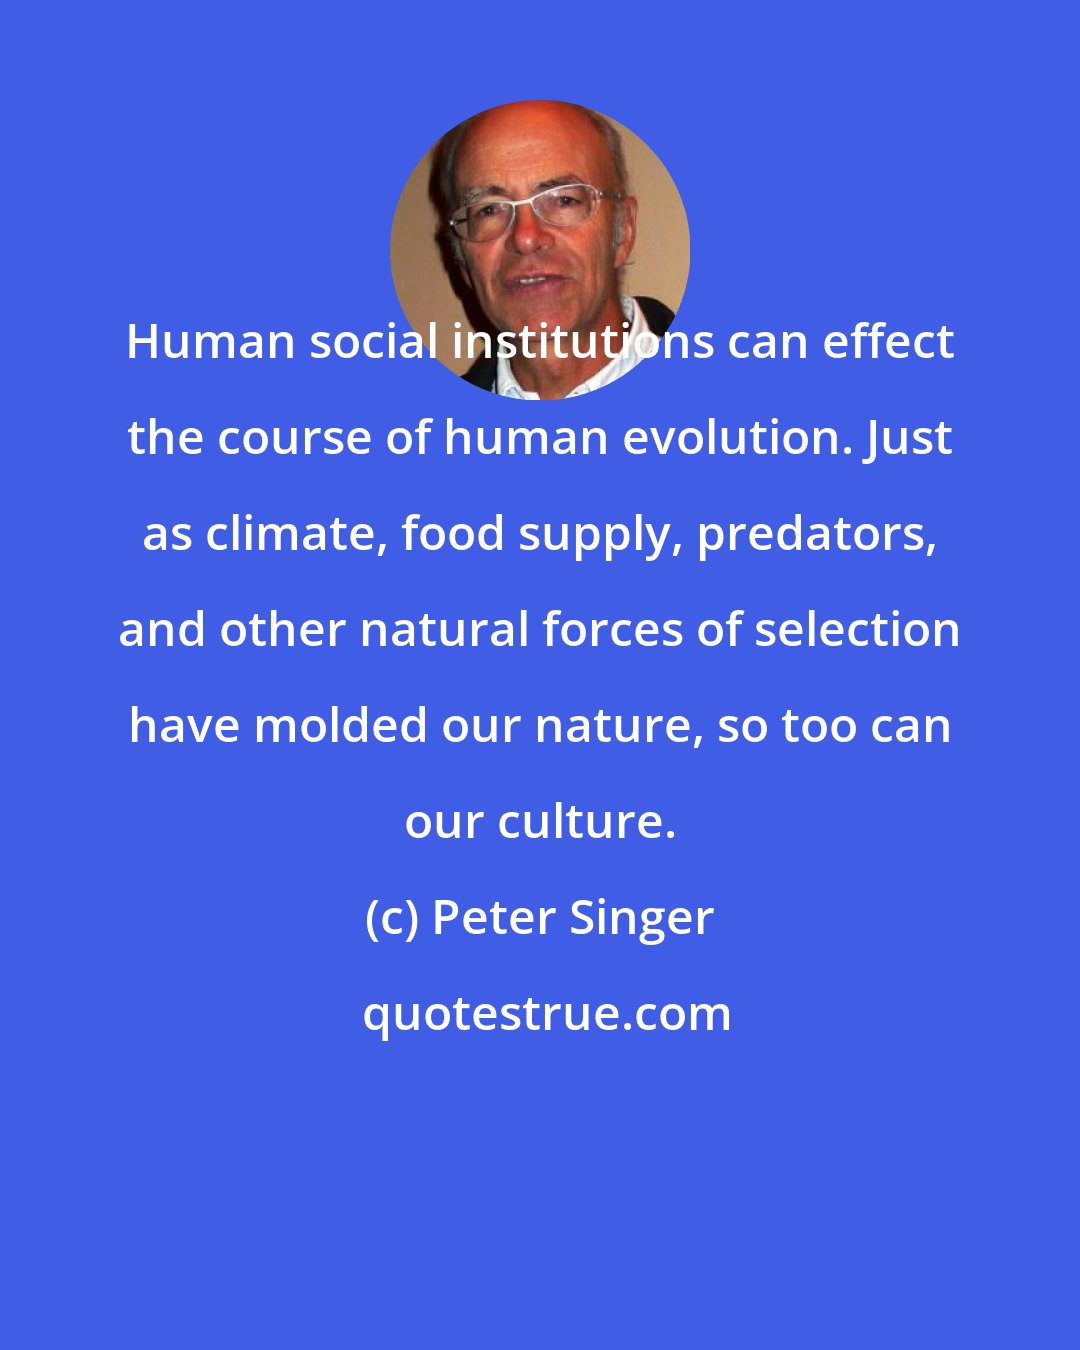 Peter Singer: Human social institutions can effect the course of human evolution. Just as climate, food supply, predators, and other natural forces of selection have molded our nature, so too can our culture.